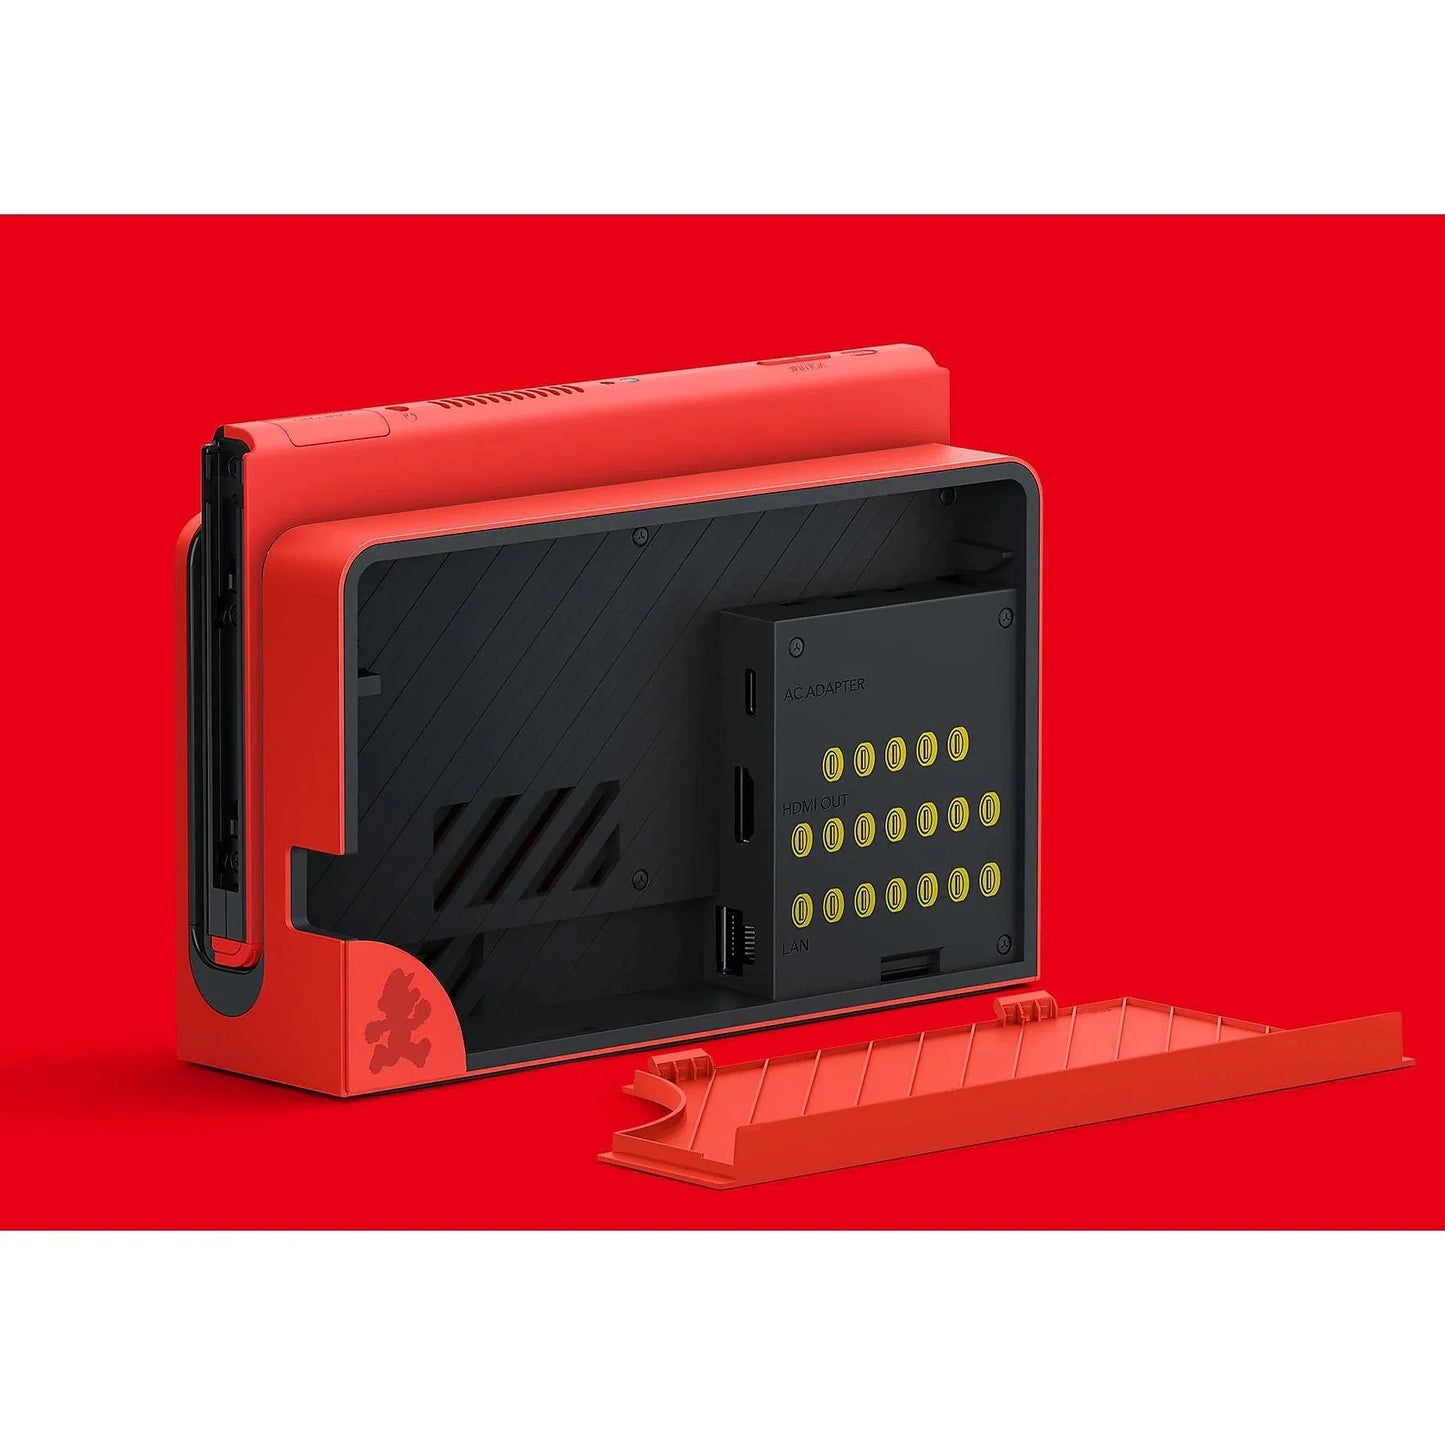 Nintendo Switch OLED Super Mario Red Edition